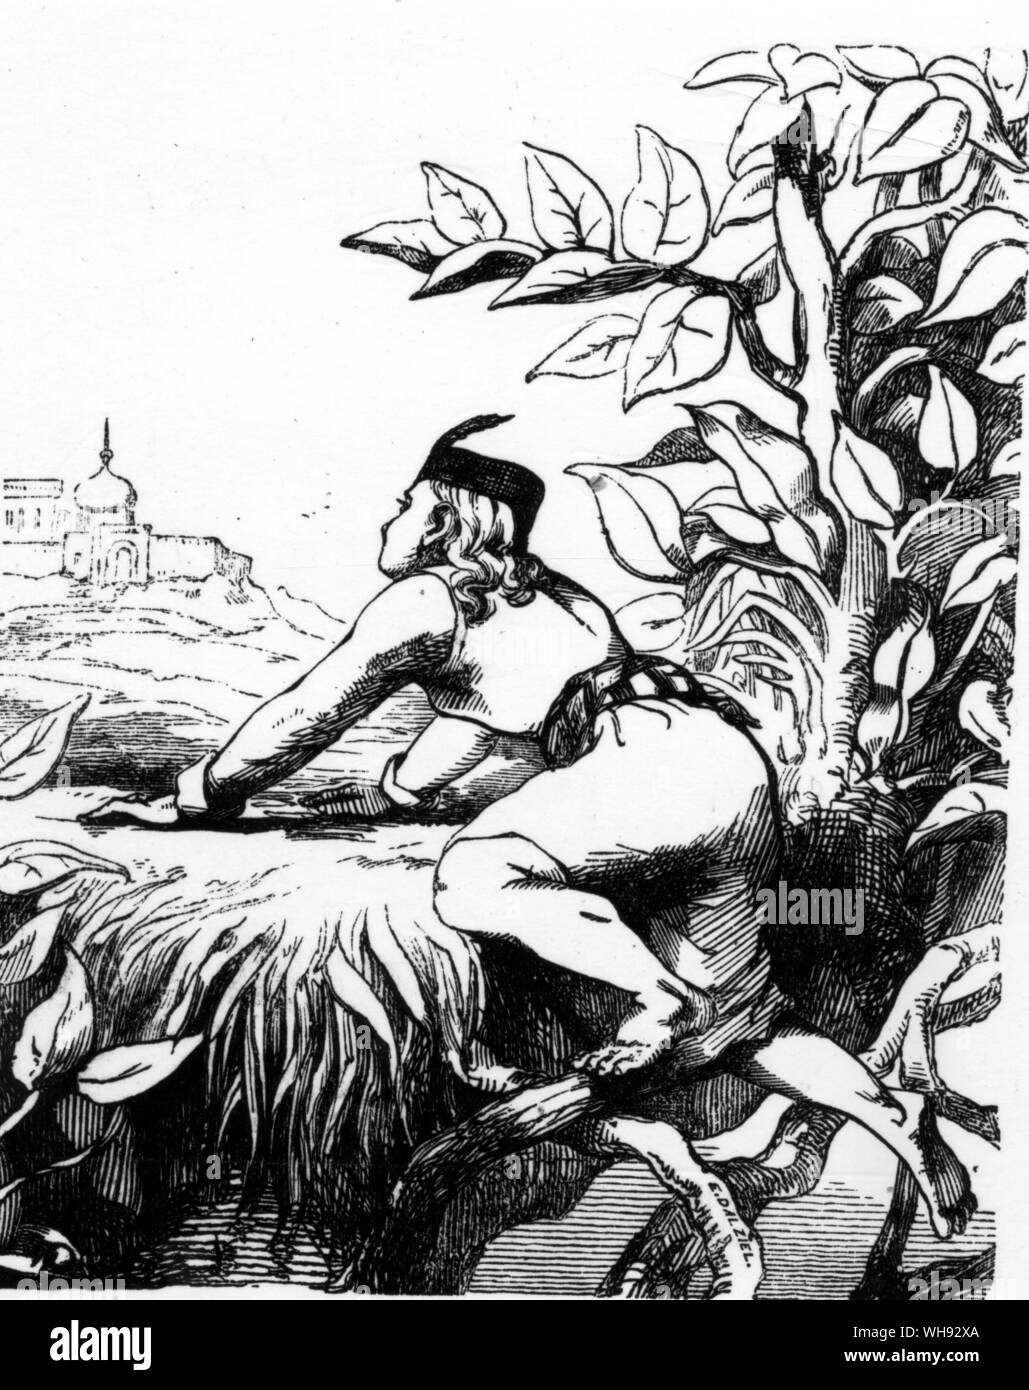 Jack and the Beanstalk. Wood engraving by E dalziel after C W Cope for the 'Lively History of Jack and the Beanstalk'.. Stock Photo